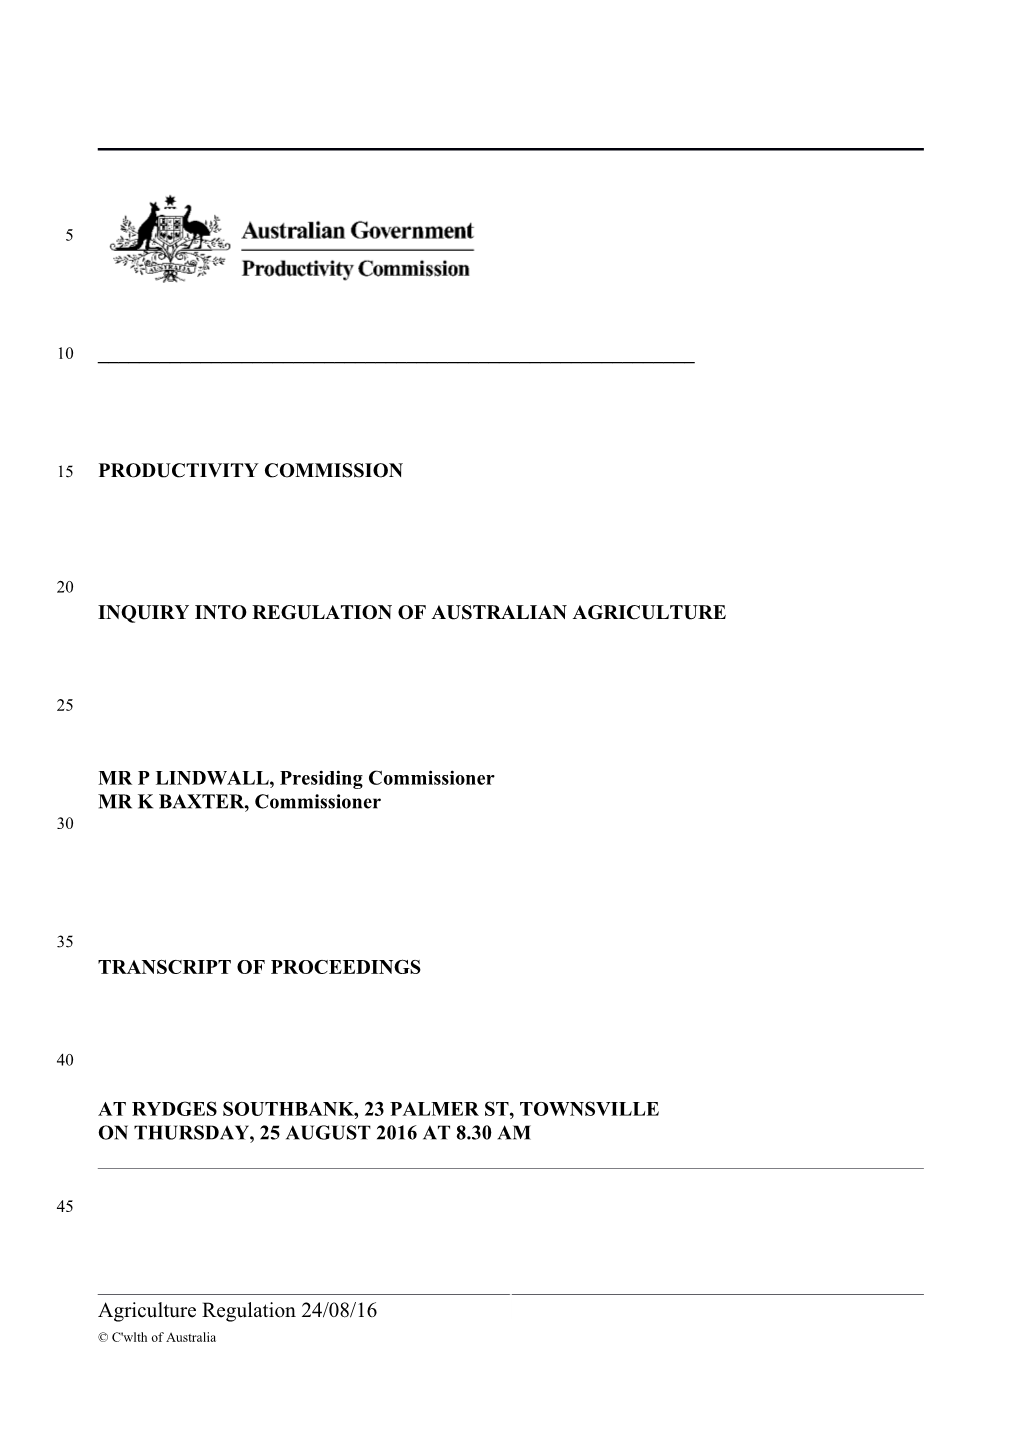 25 August 2016 - Townsville Public Hearing Transcript - Regulation of Agriculture s1